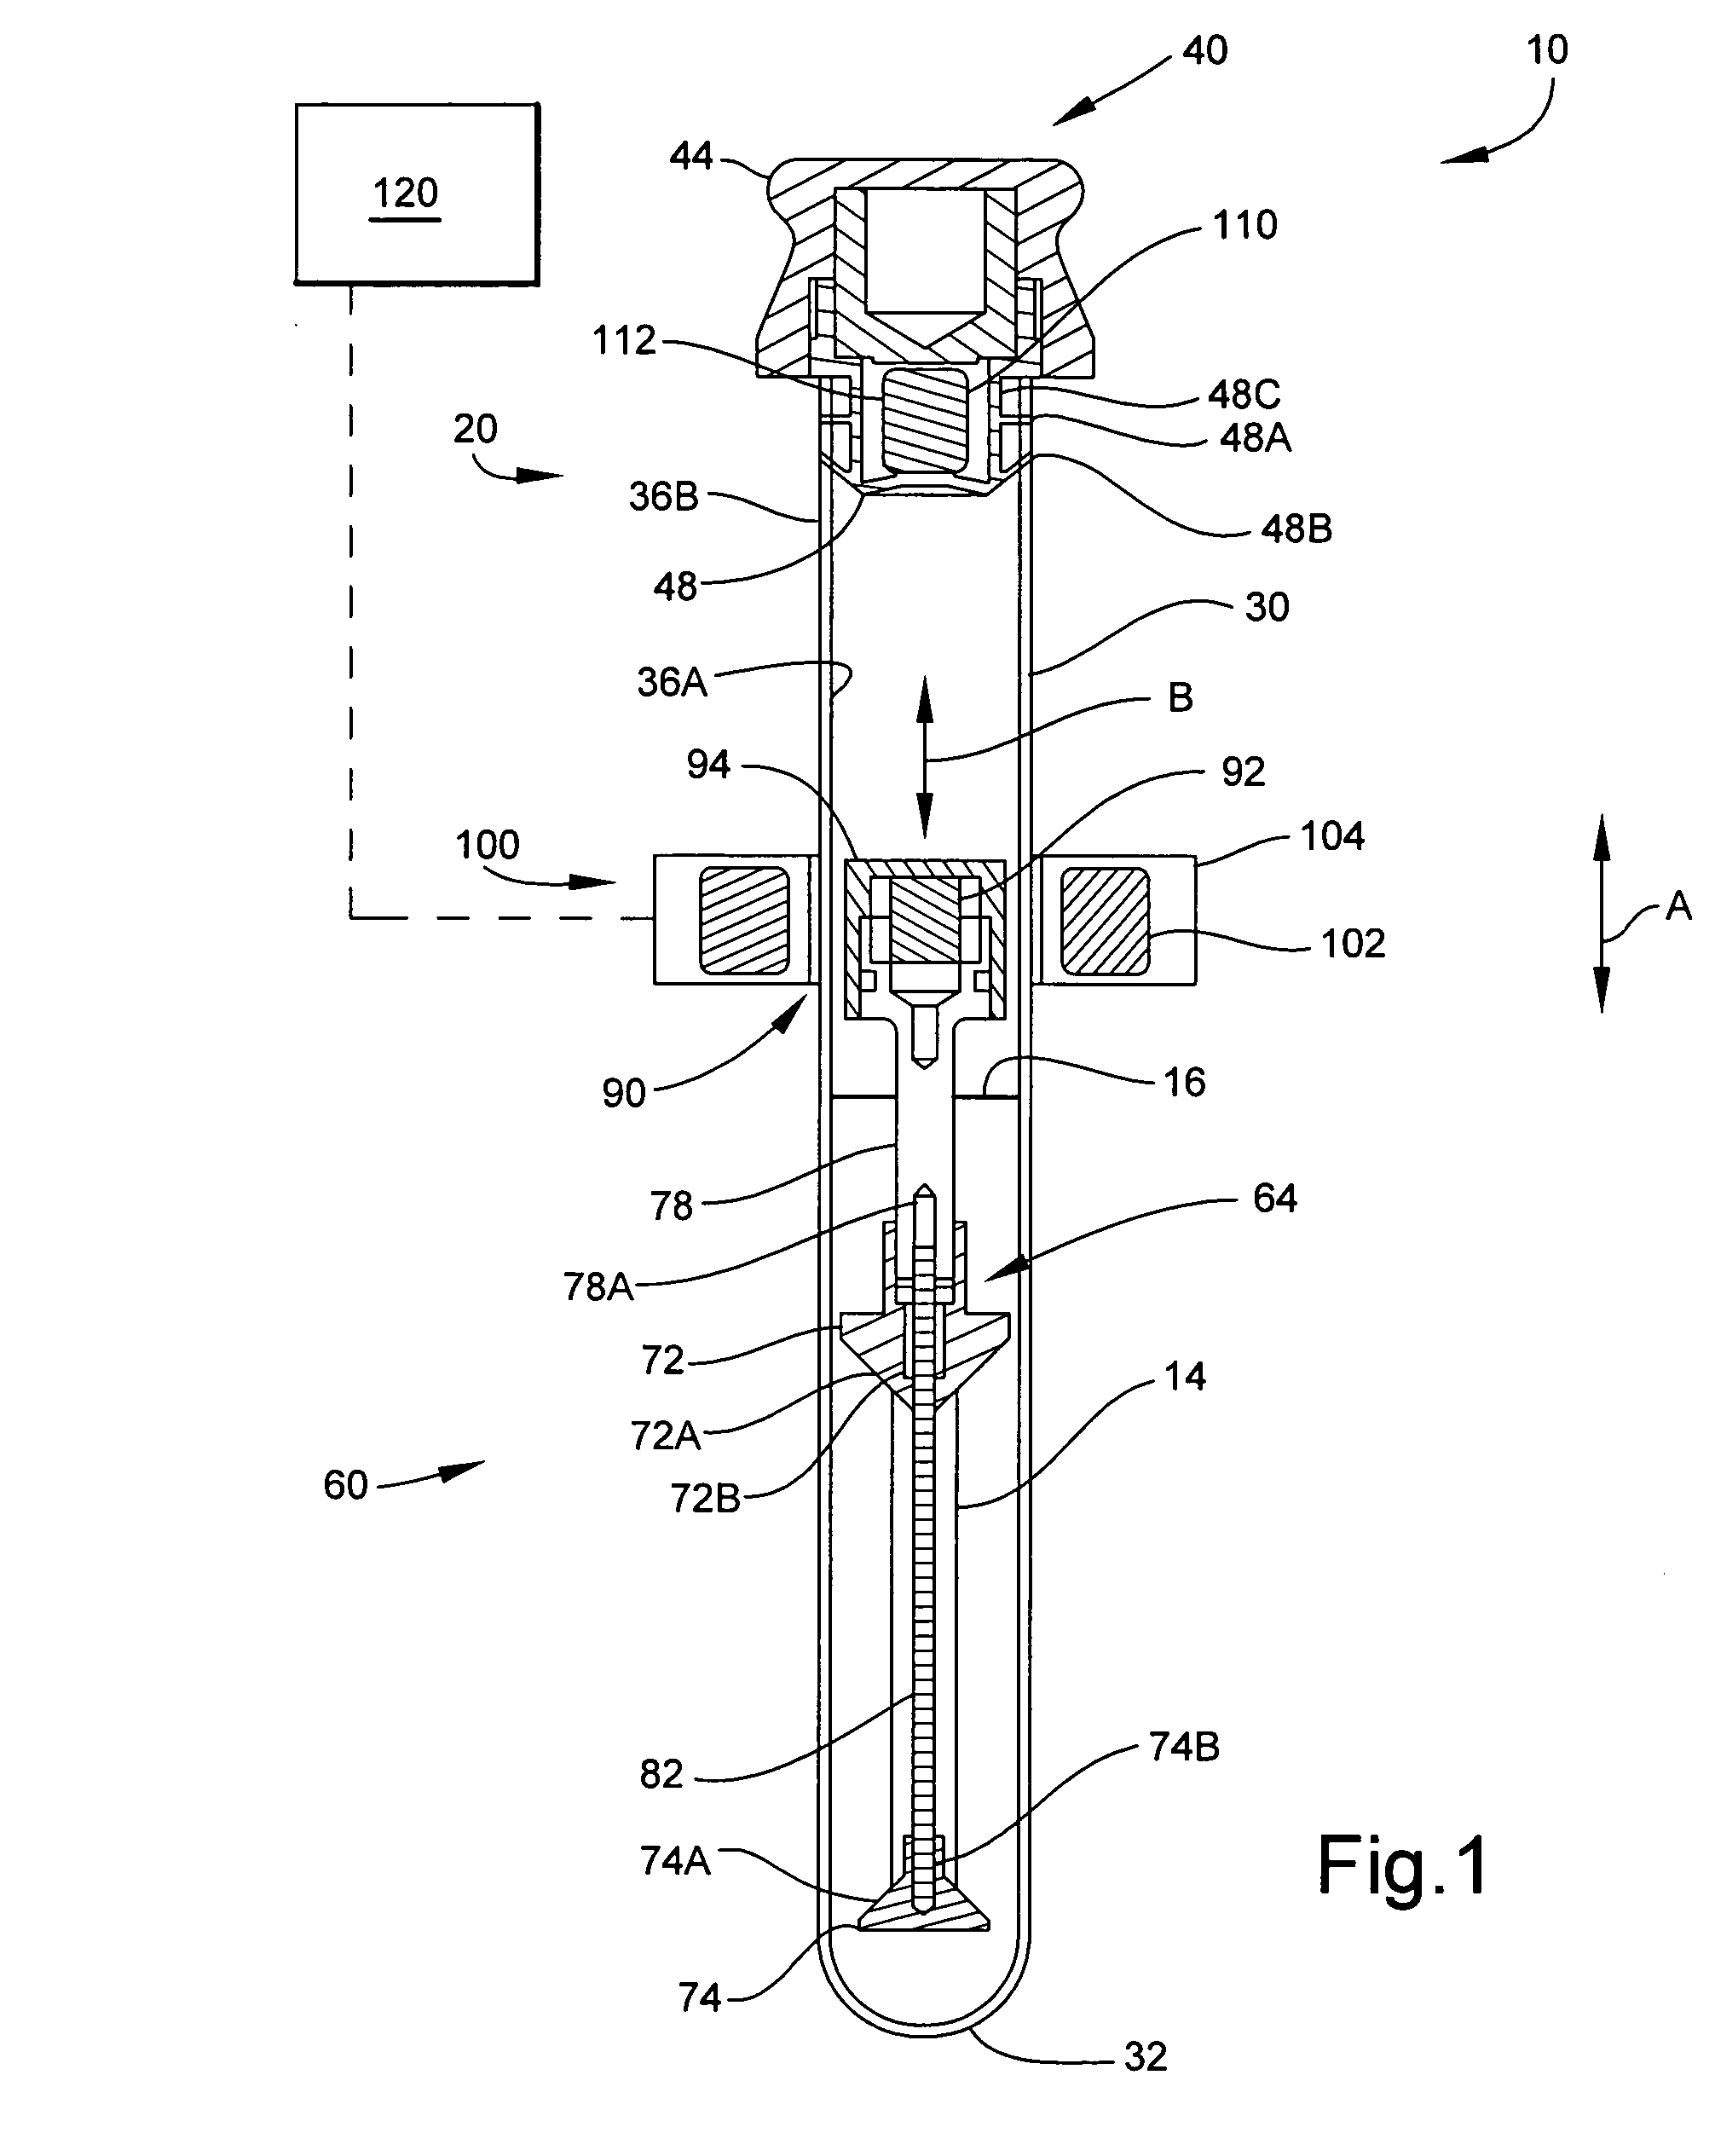 Apparatus and method for agitating a sample during in vitro testing